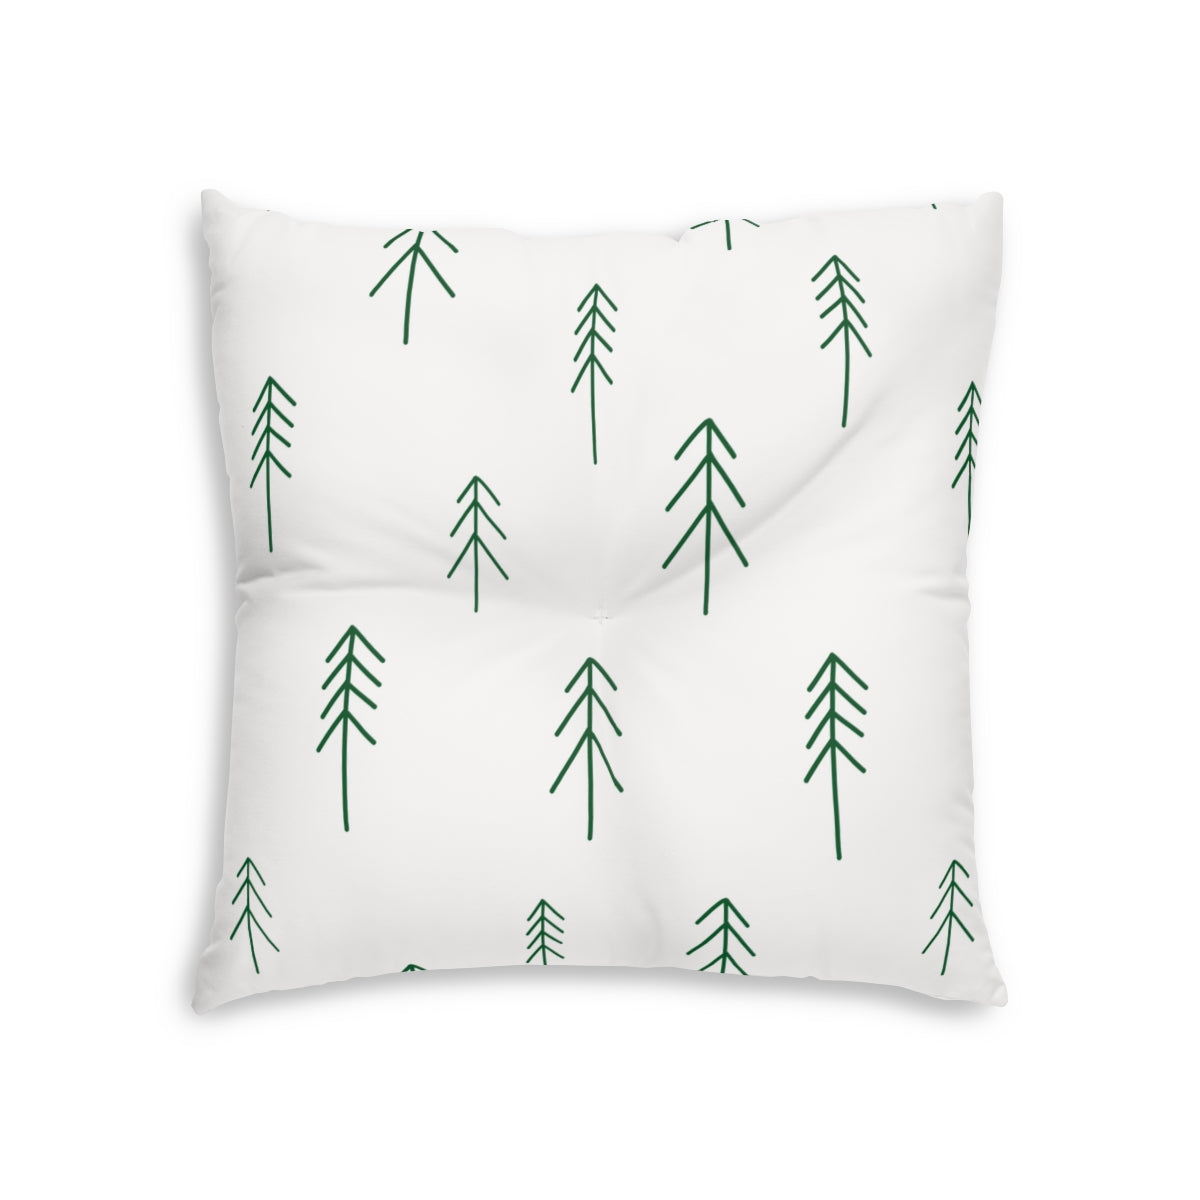 Lifestyle Details - White Square Tufted Holiday Floor Pillow - Evergreen - 26x26 - Front View